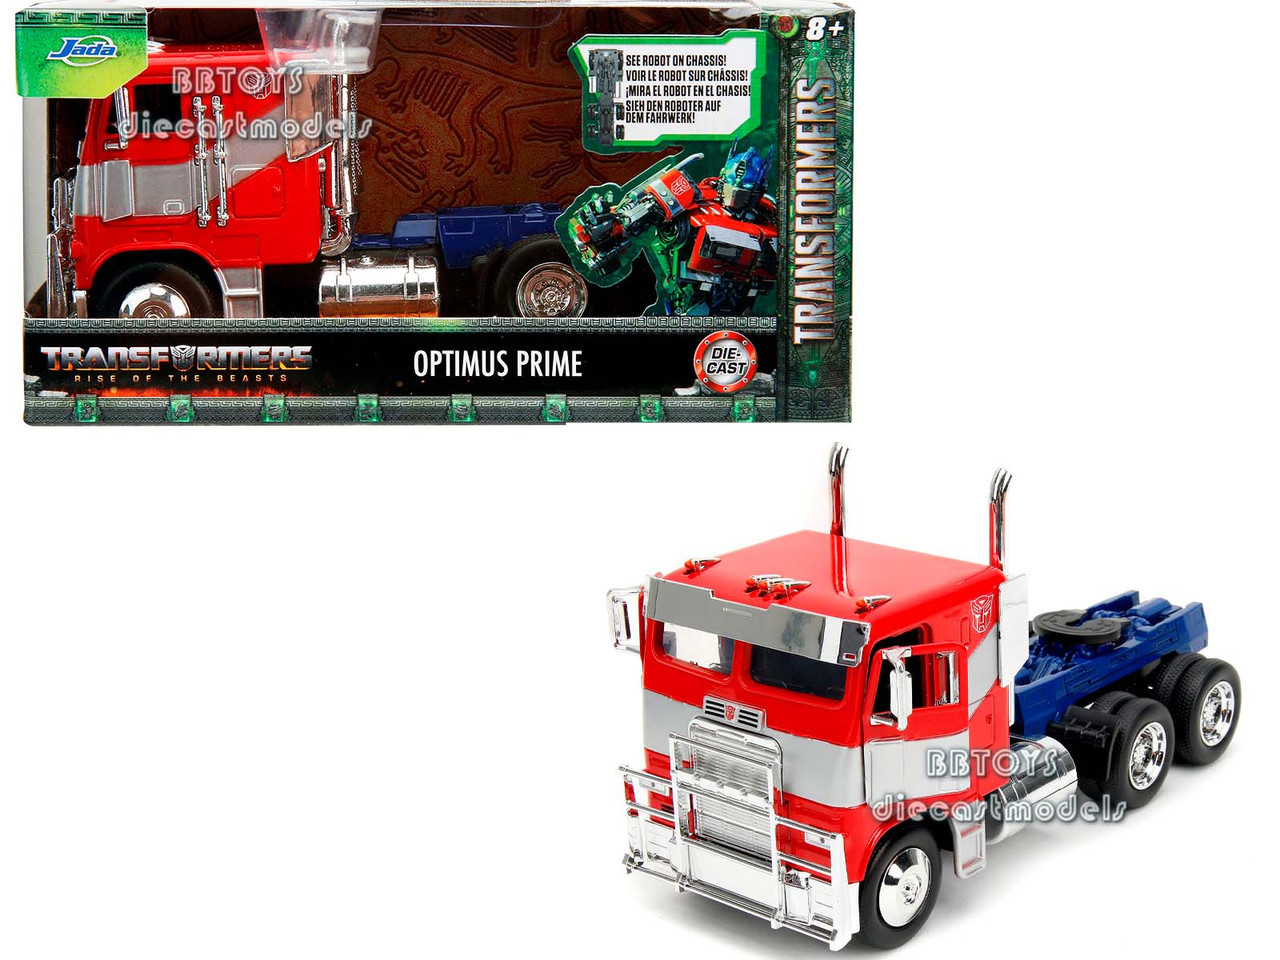 G1 Autobot Optimus Prime Truck Red with Robot on Chassis from